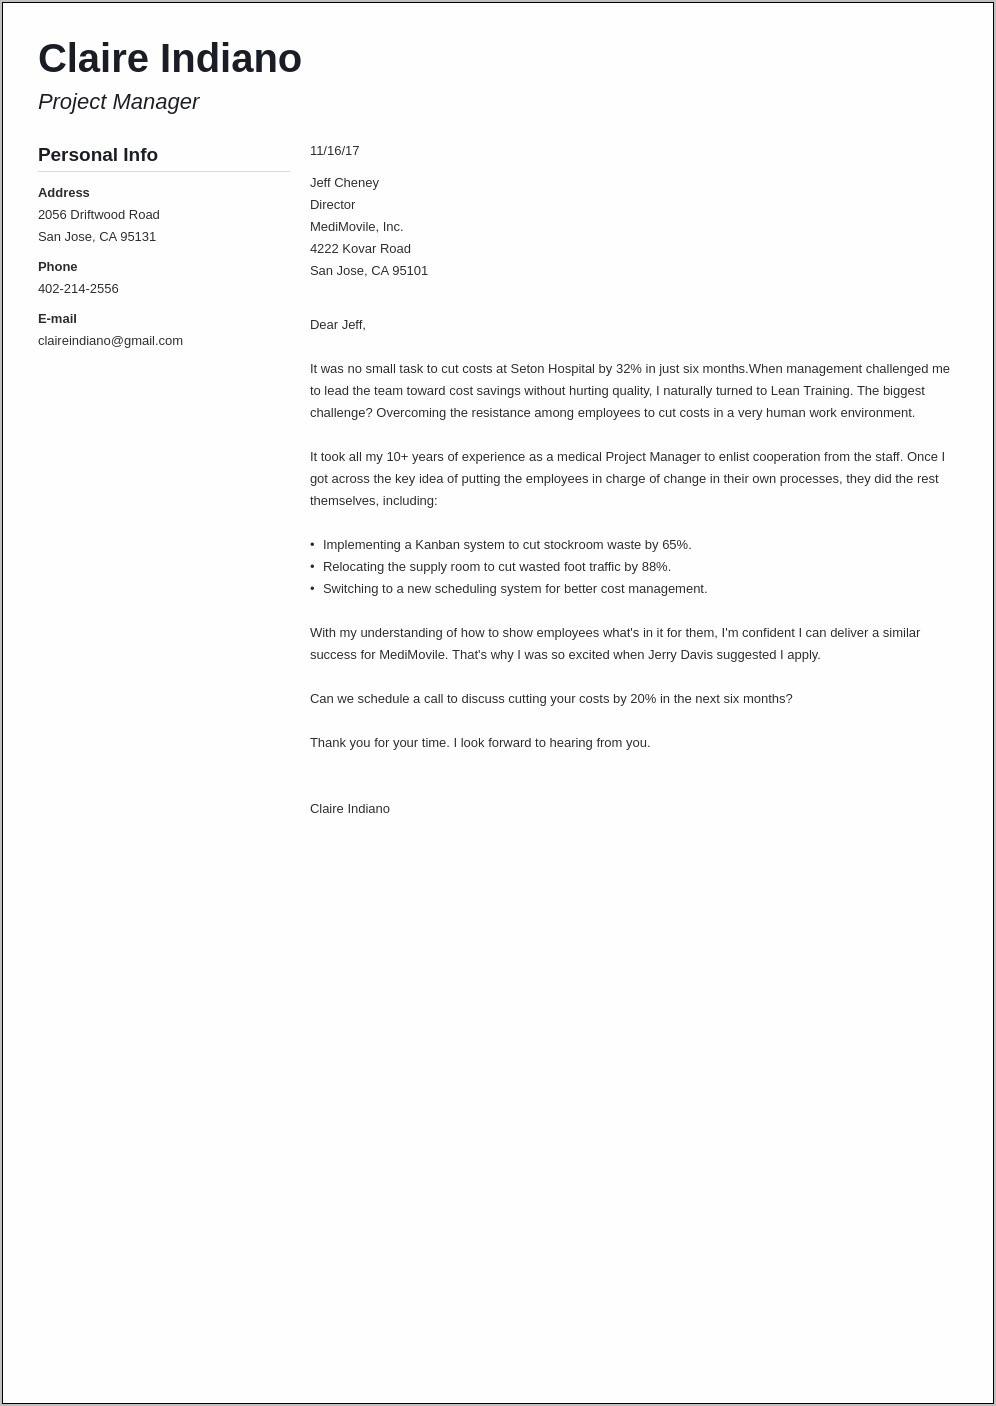 Resume Received Will Get Back To You Letter